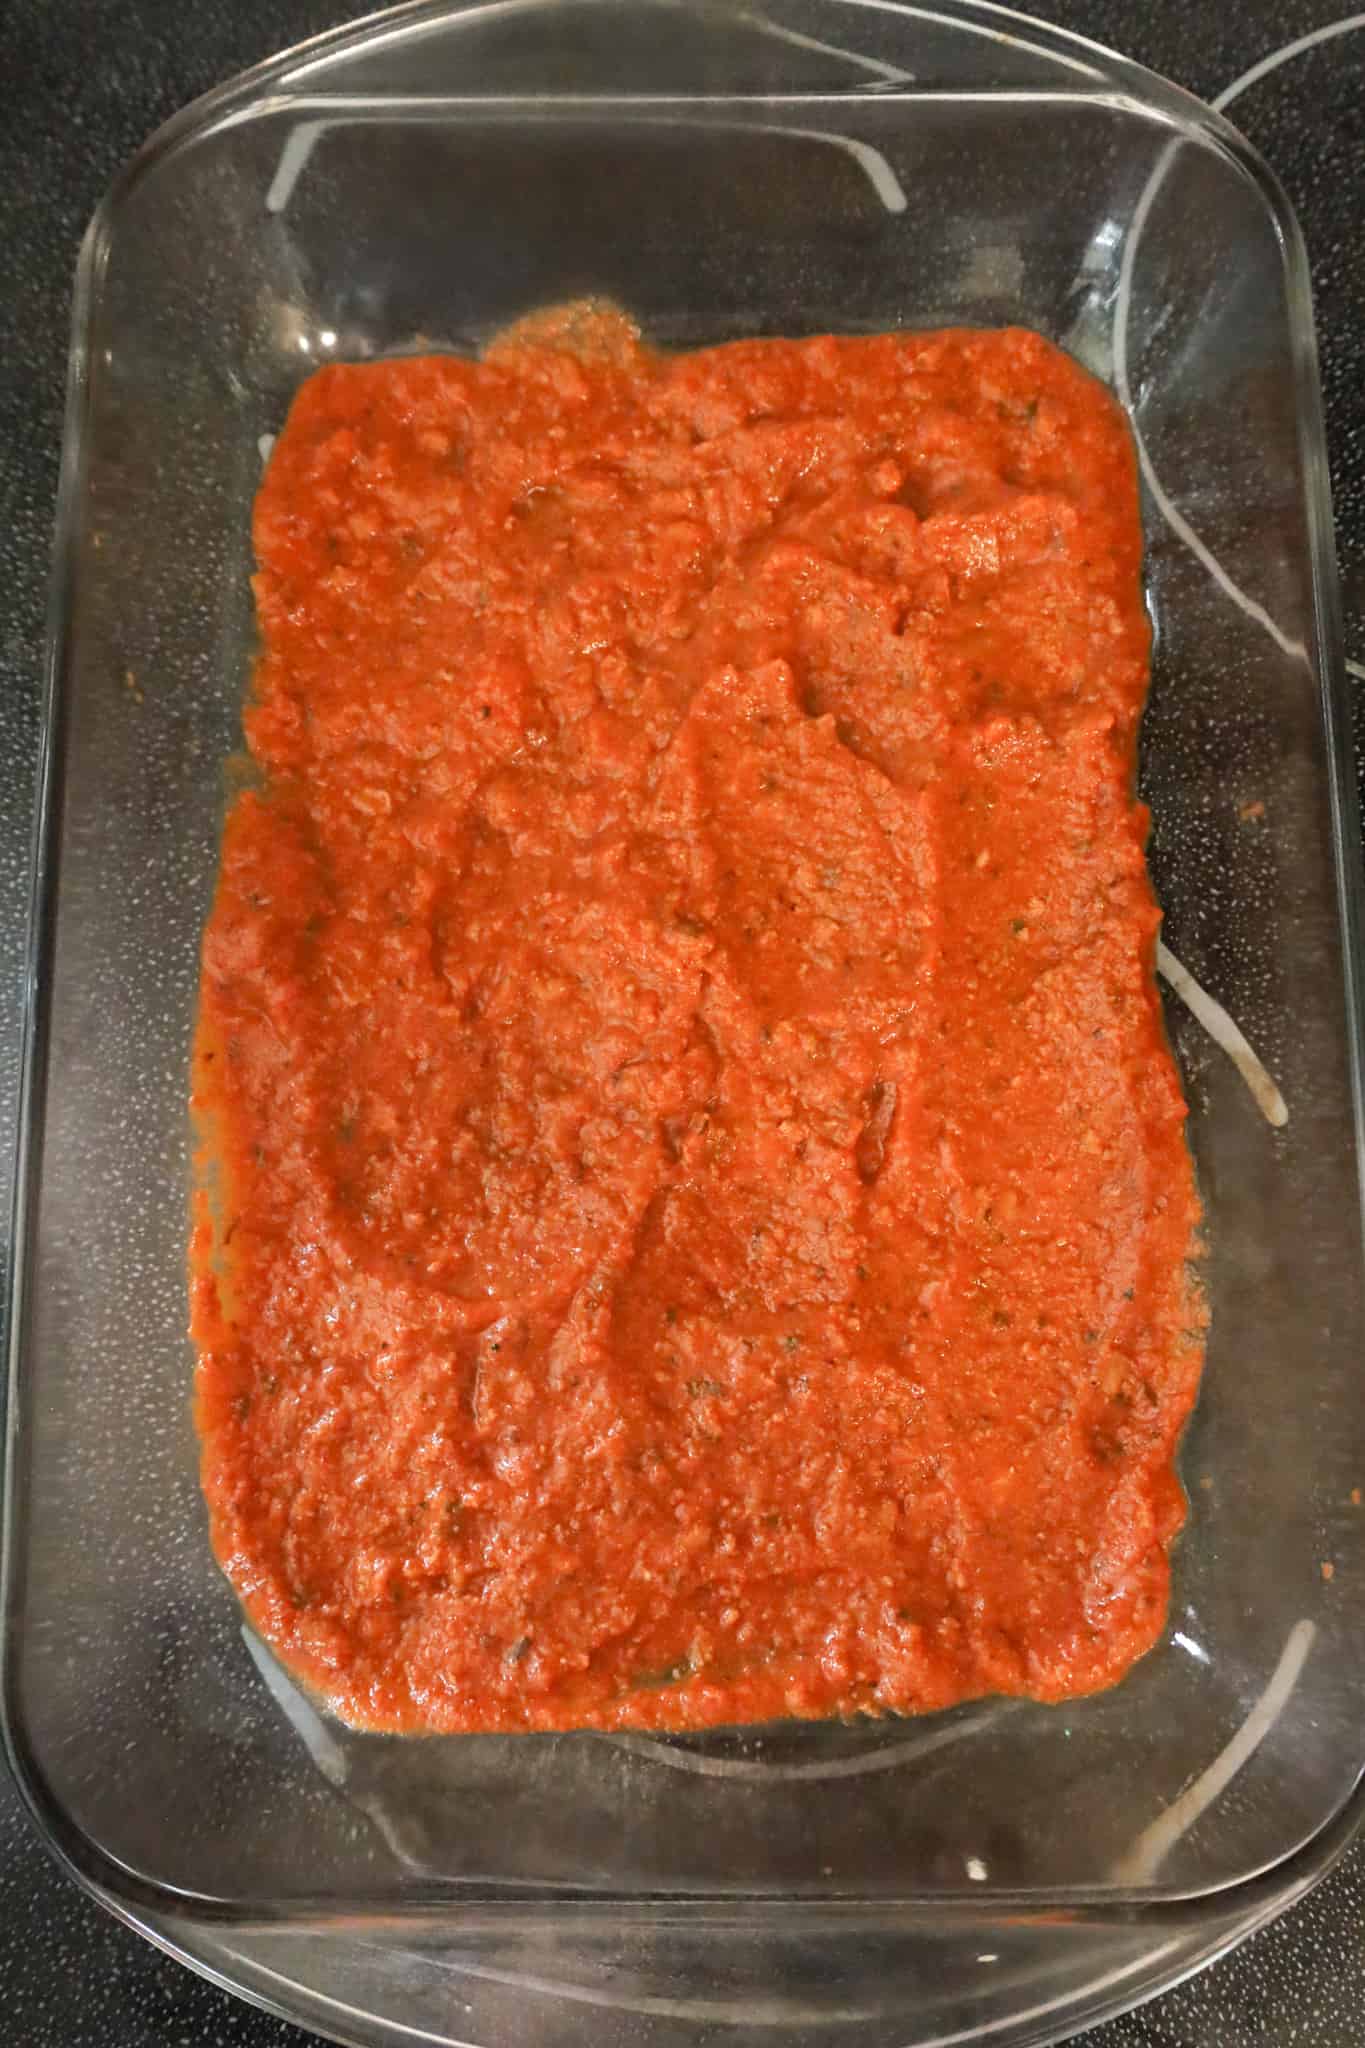 bolognese sauce in the bottom of a 9 x 13 inch baking dish